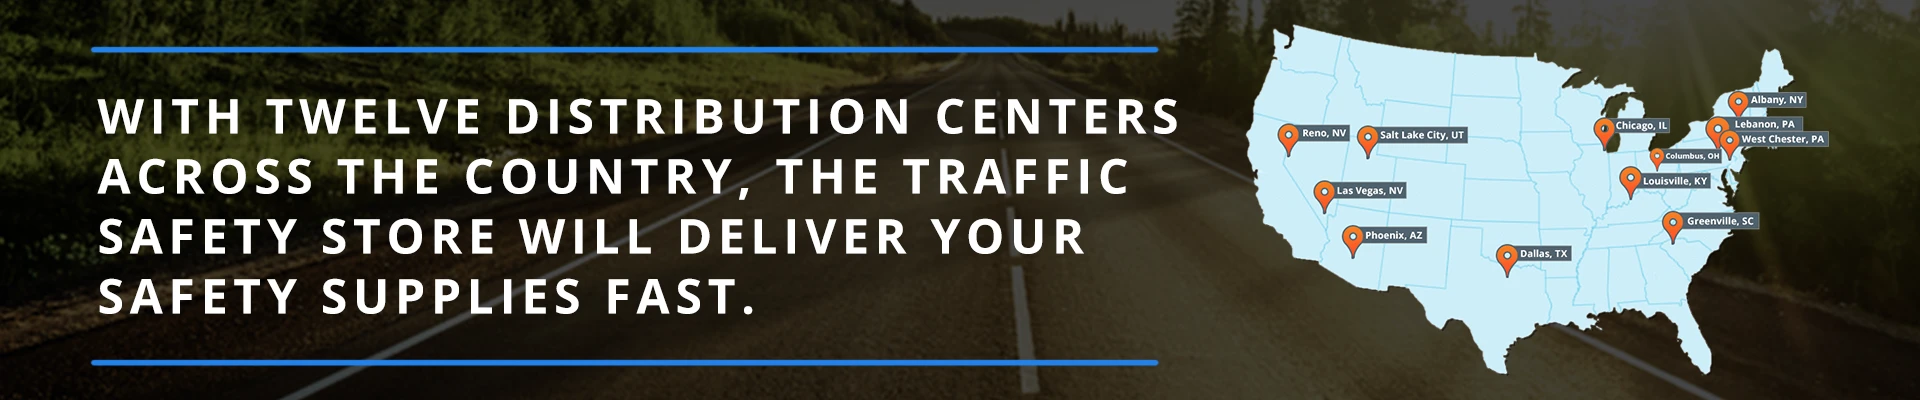 With twelve distribution centers accross the country, the traffic safety store will deliver your safety supplies fast